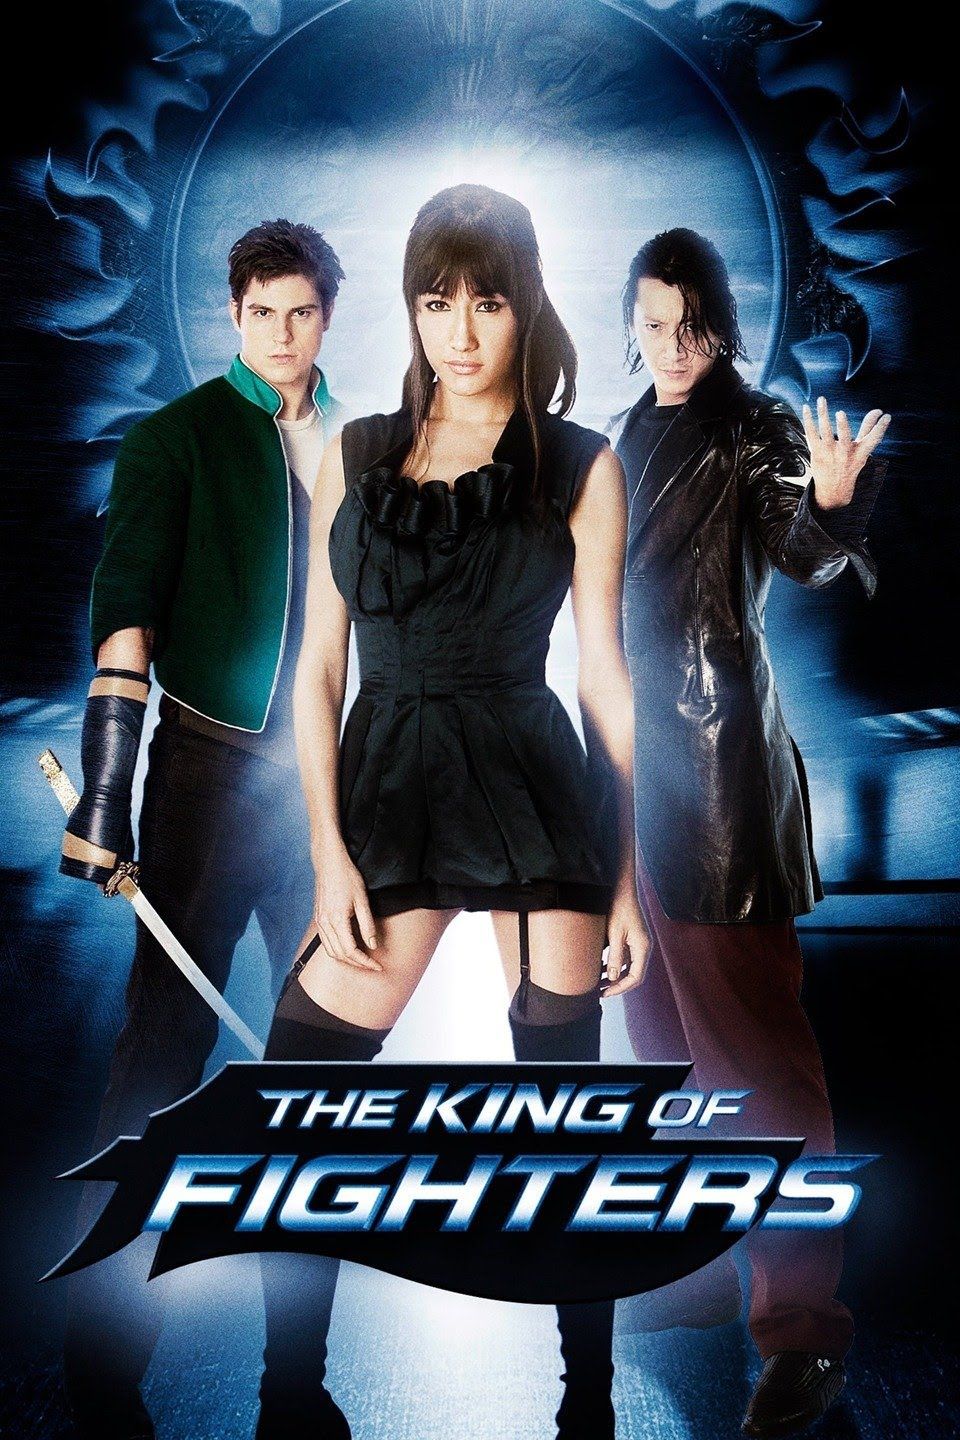 The King of Fighters (2009) Hindi Dubbed ORG BluRay Full Movie 720p 480p